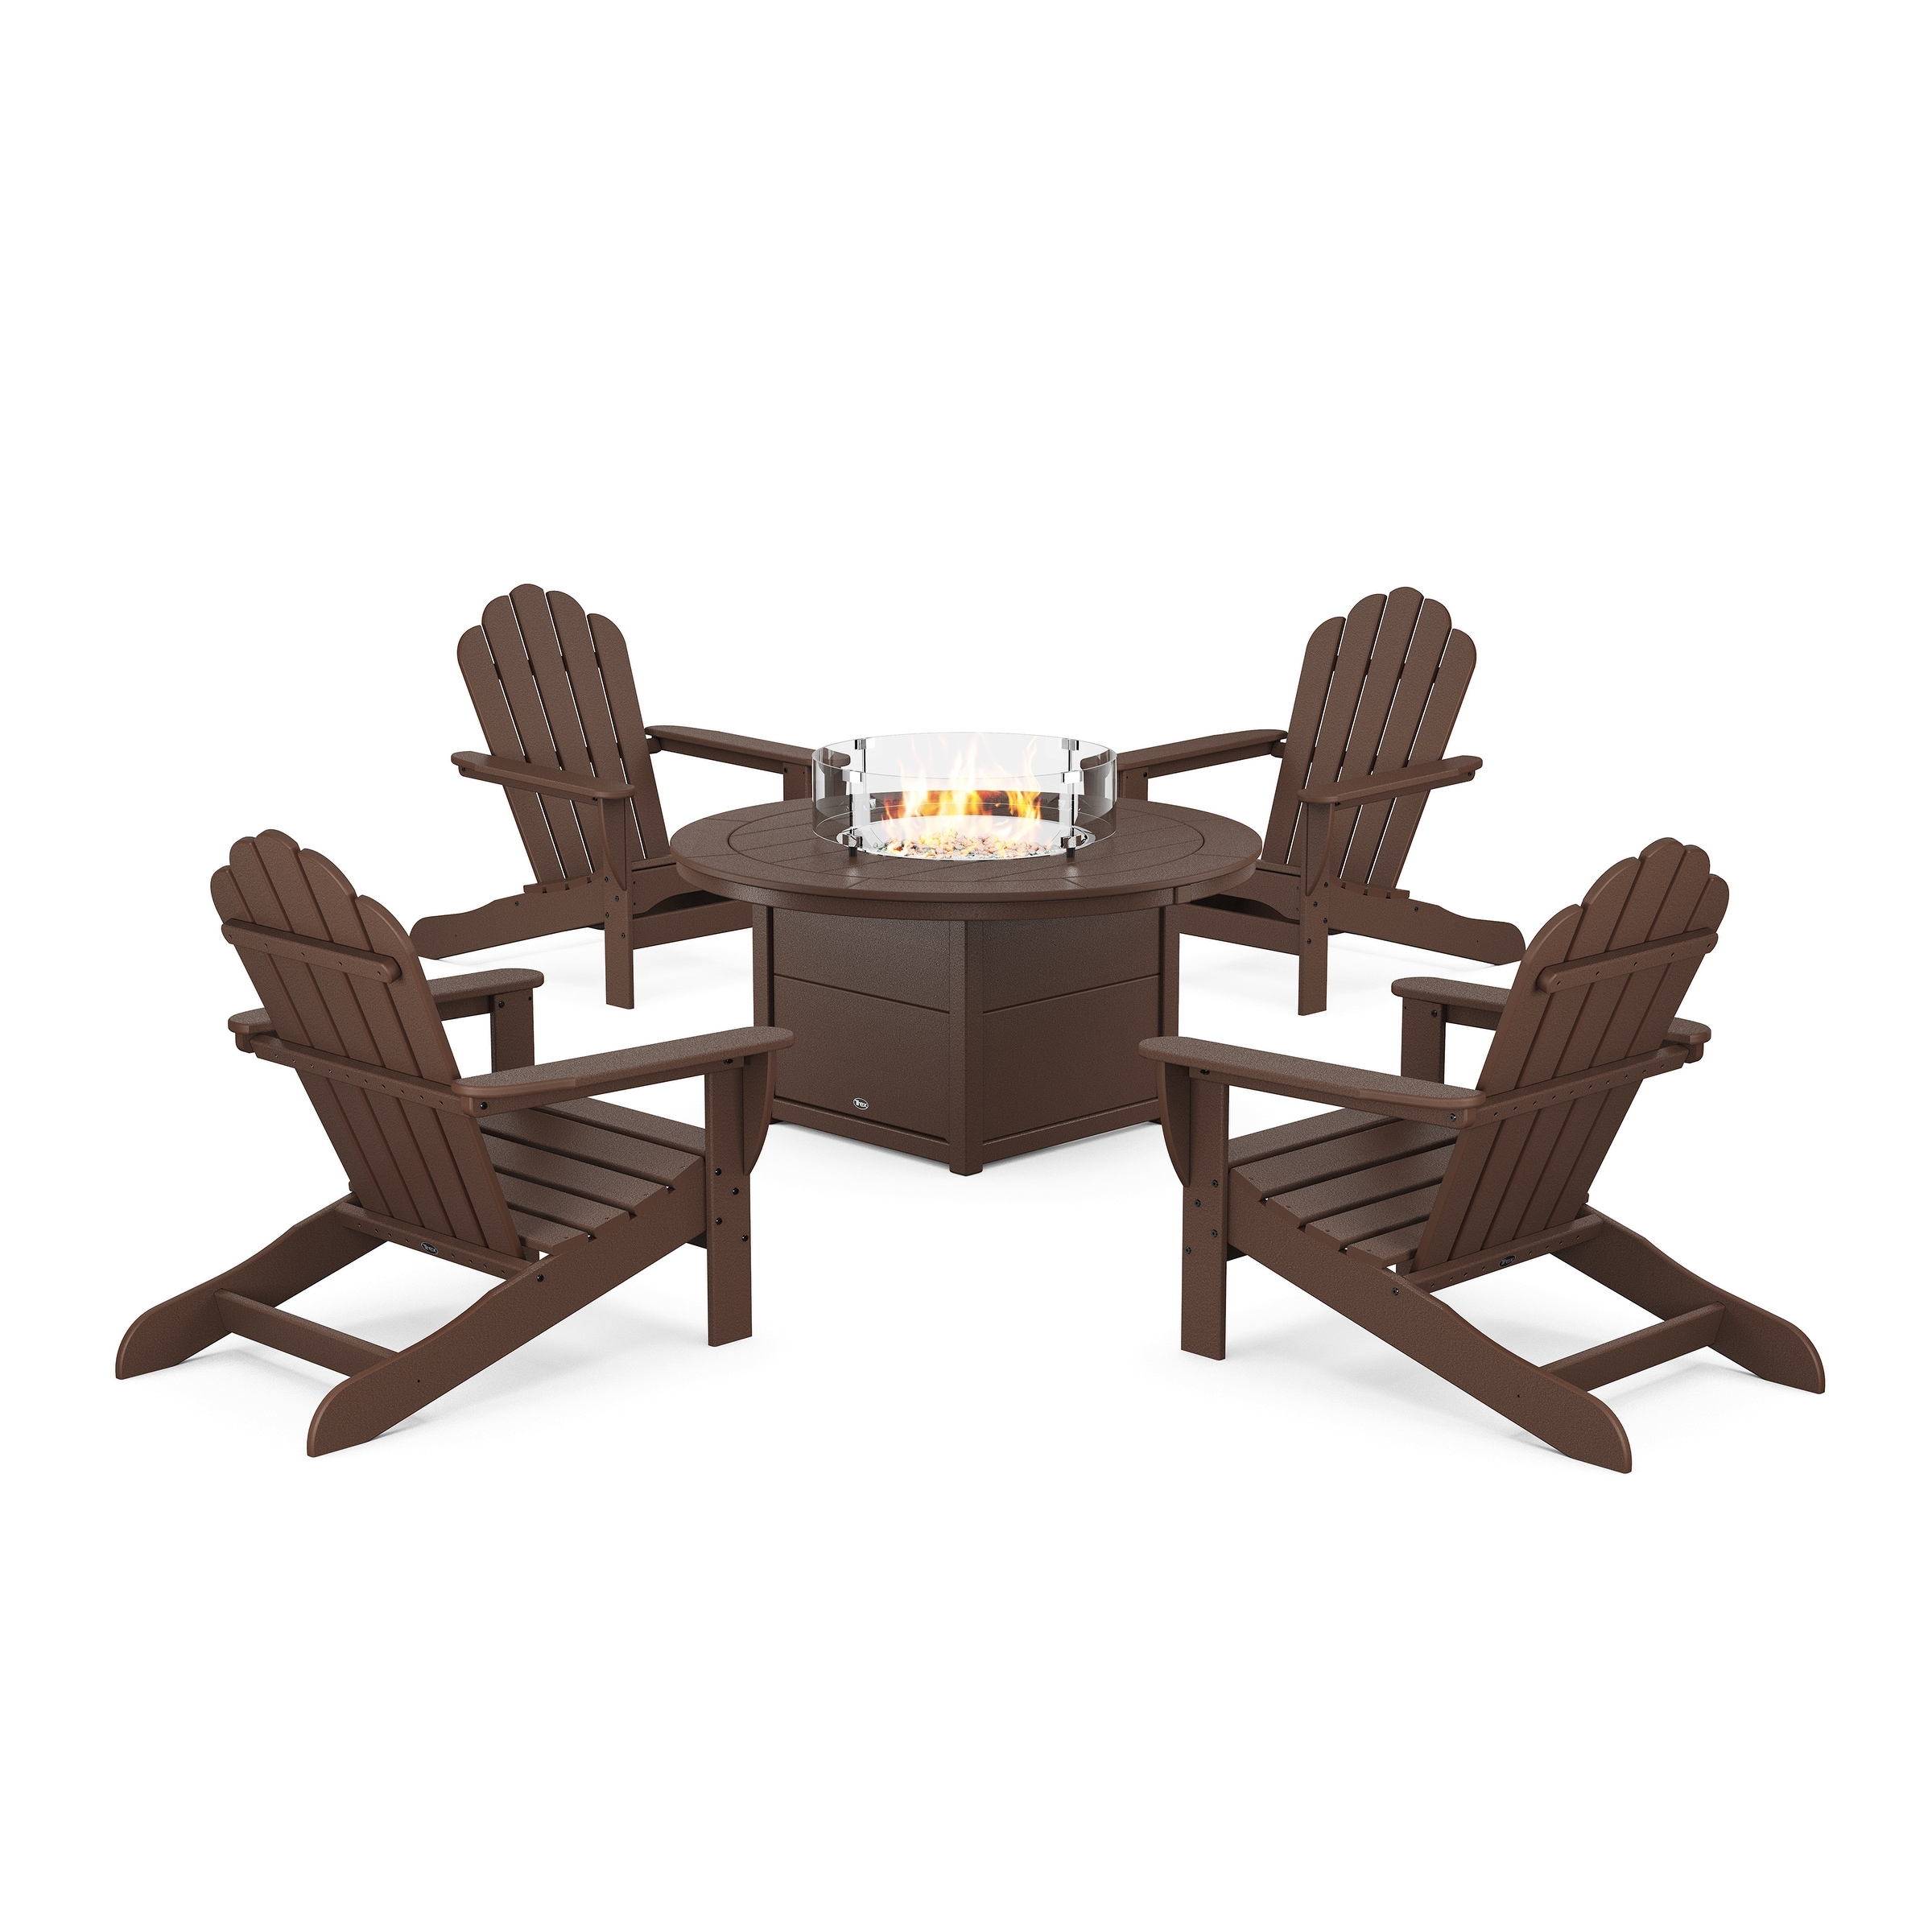 5-piece Monterey Bay Oversized Adirondack Conversation Set With Fire Pit Table